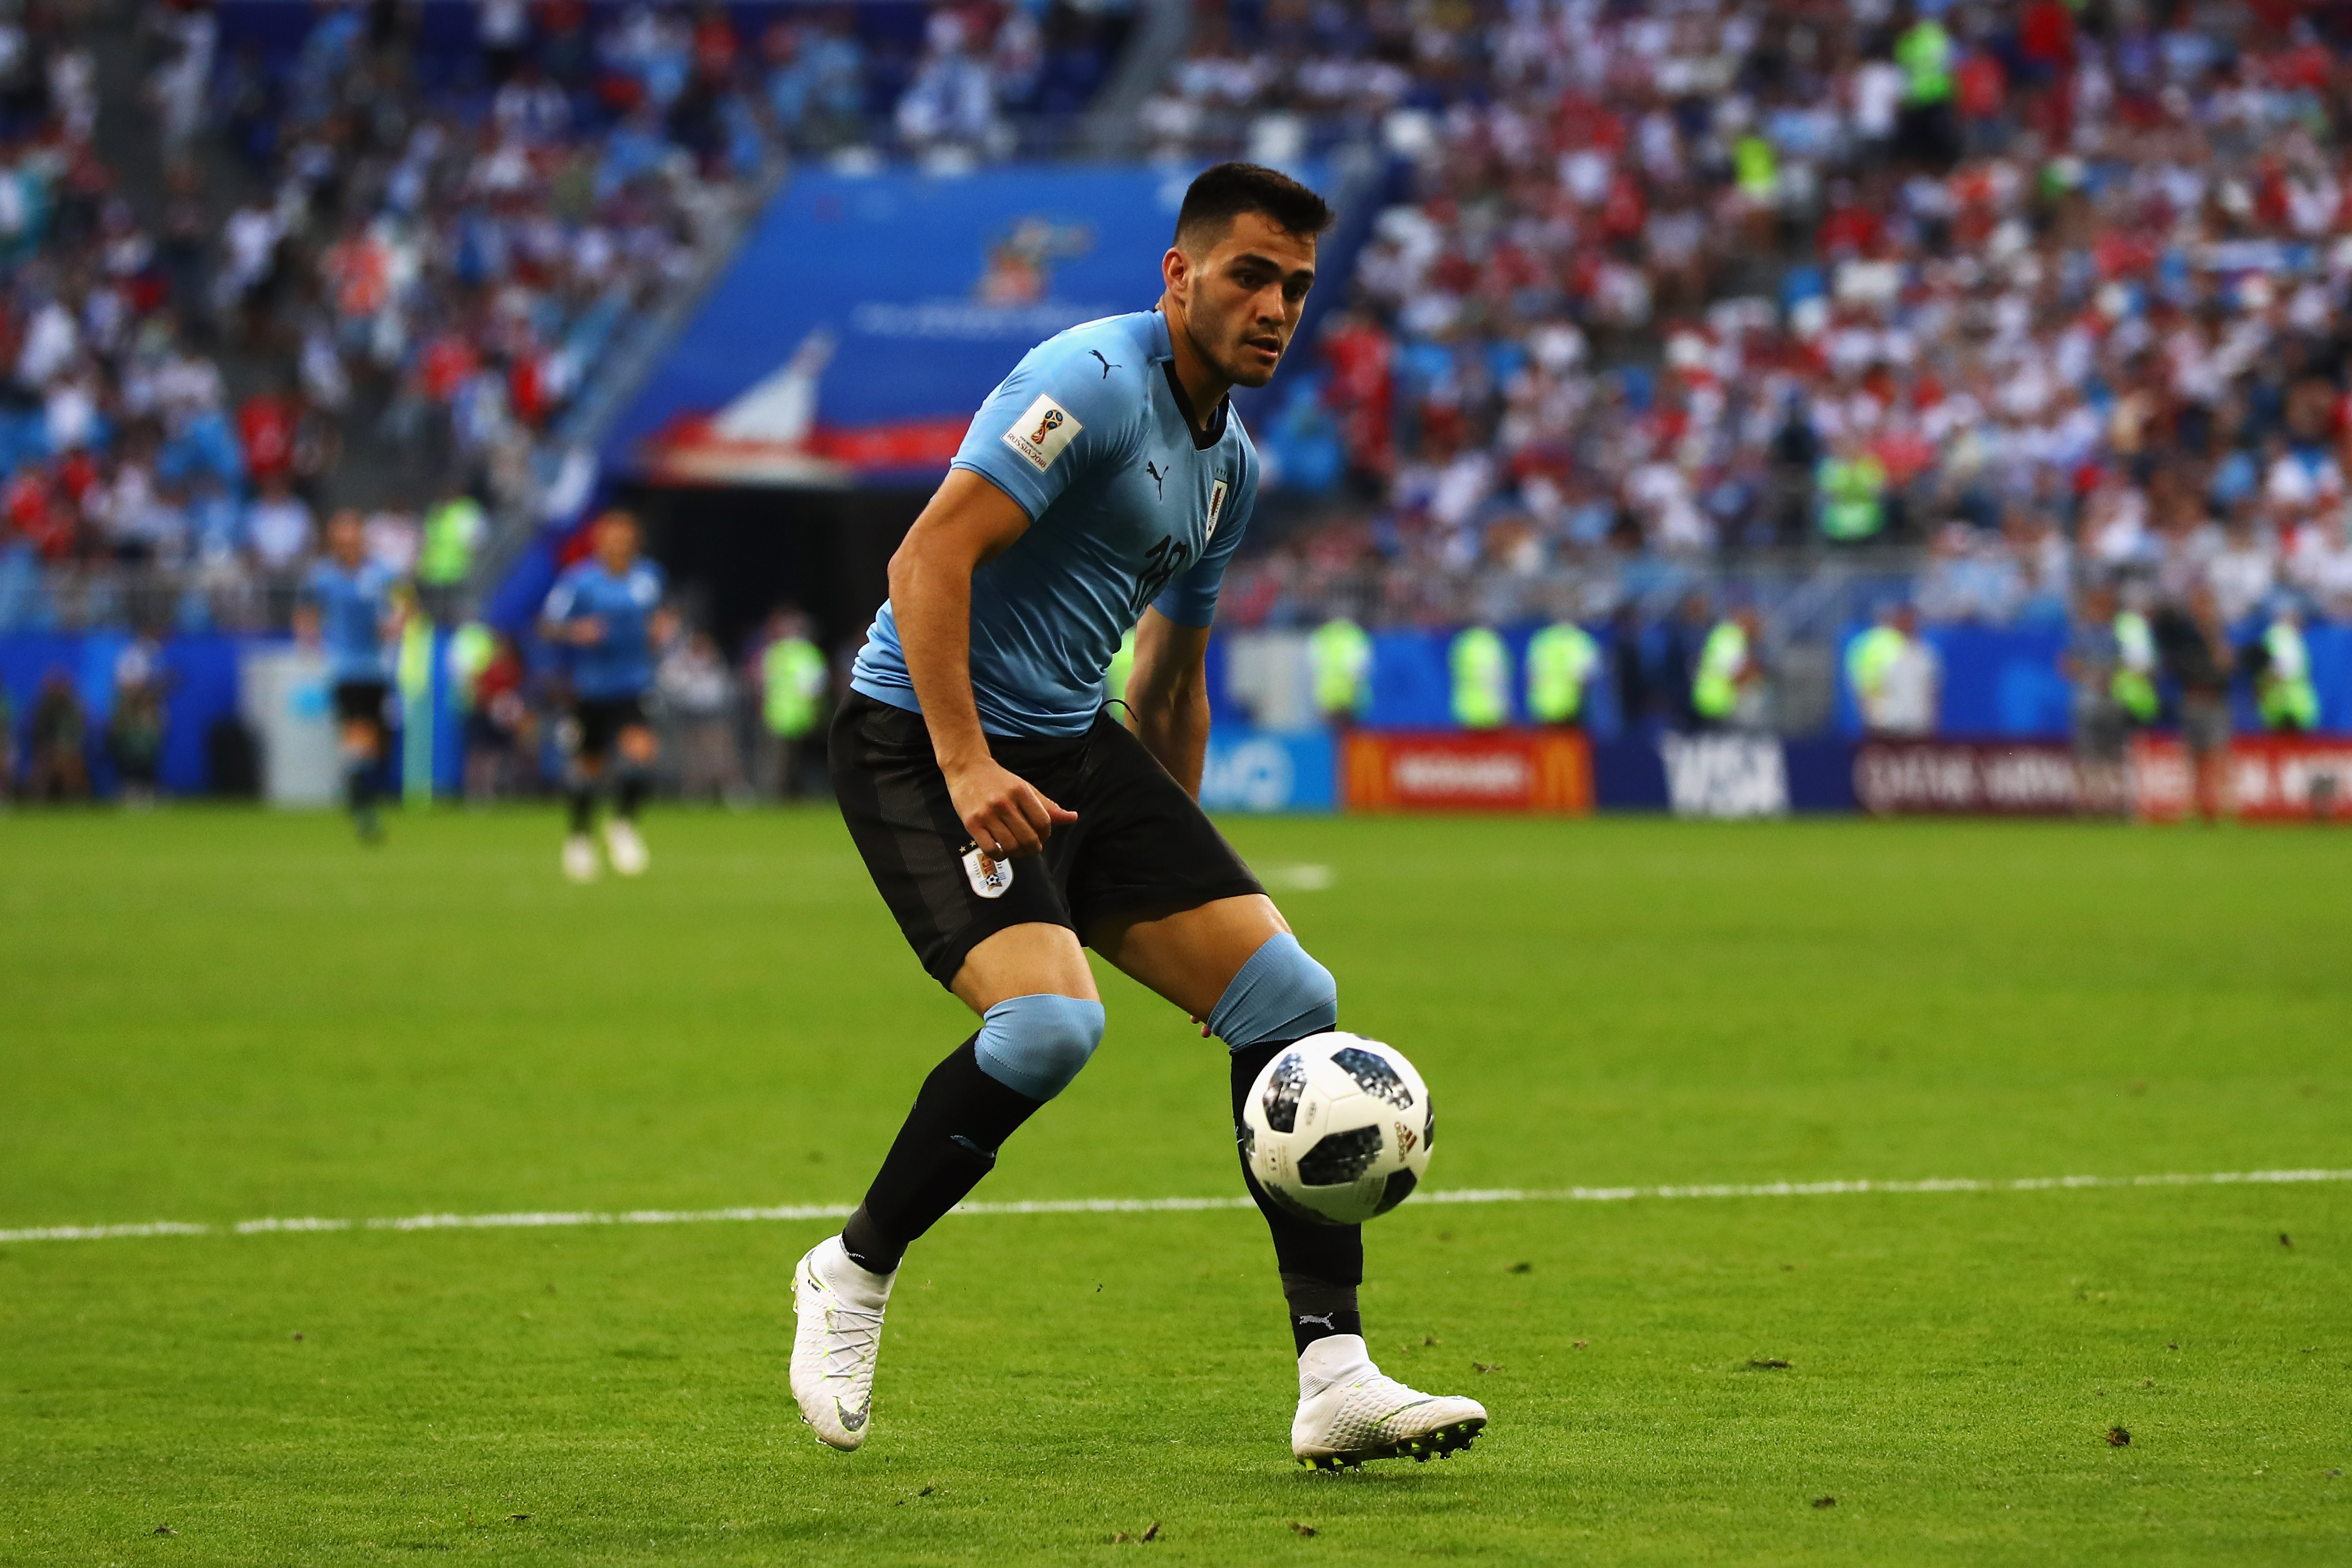 SAMARA, RUSSIA - JUNE 25:  Maxi Gomez of Uruguay in action during the 2018 FIFA World Cup Russia group A match between Uruguay and Russia at Samara Arena on June 25, 2018 in Samara, Russia.  (Photo by Dean Mouhtaropoulos/Getty Images)